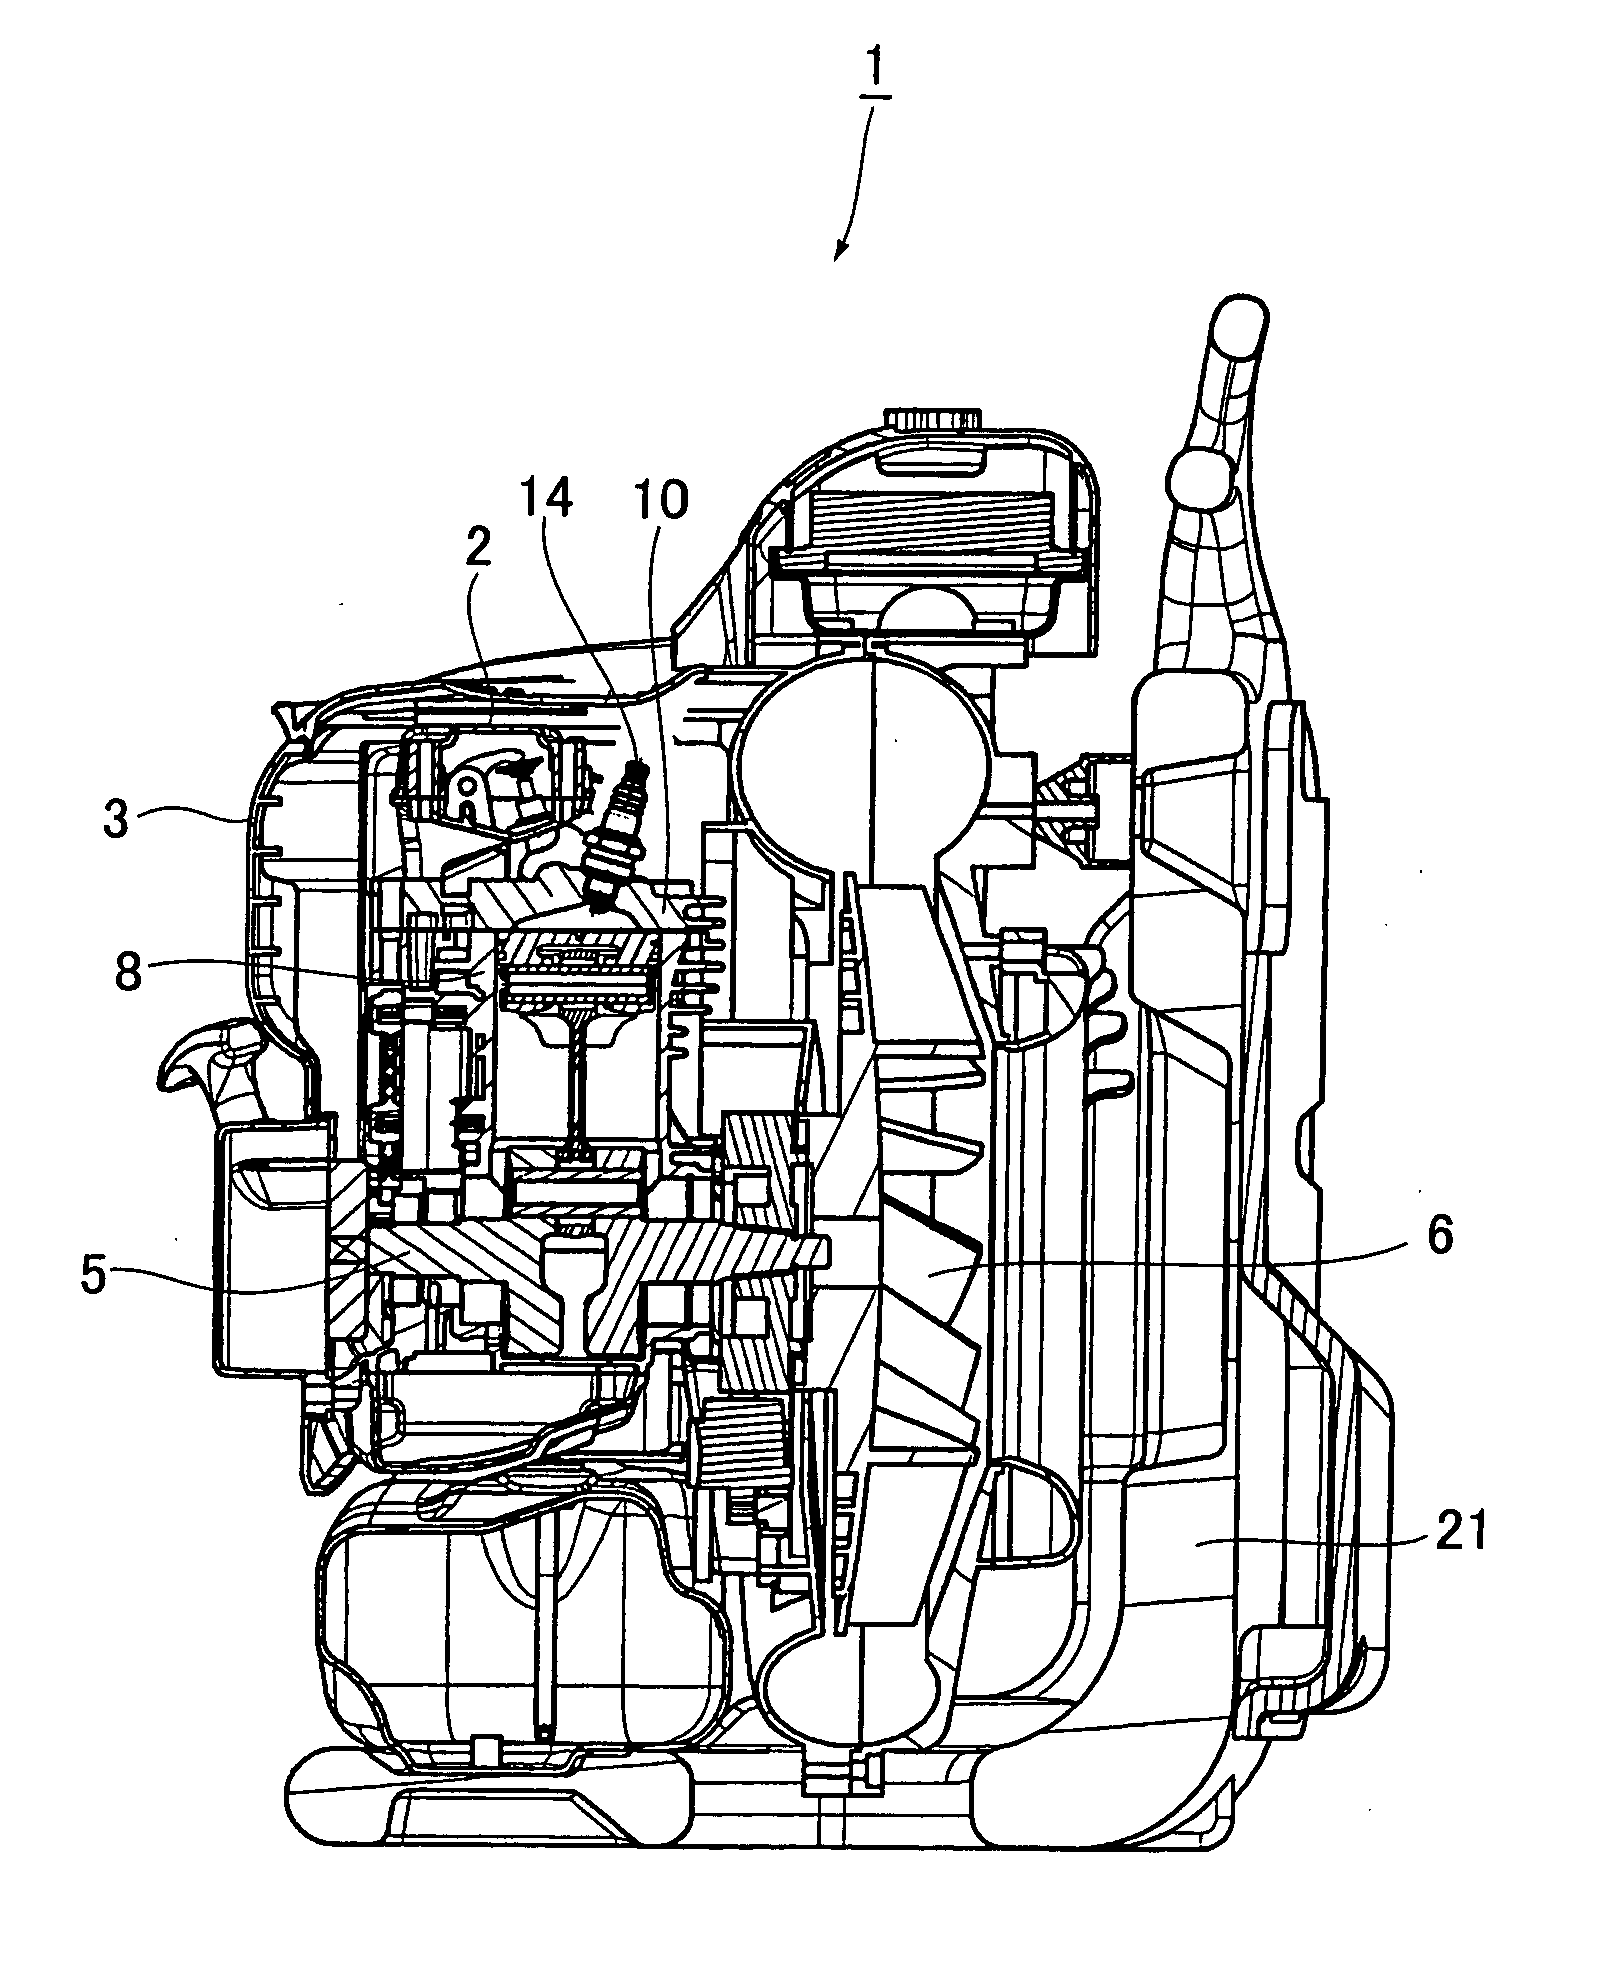 Portable 4-cycle engine and portable machine equipped with the 4-cycle engine